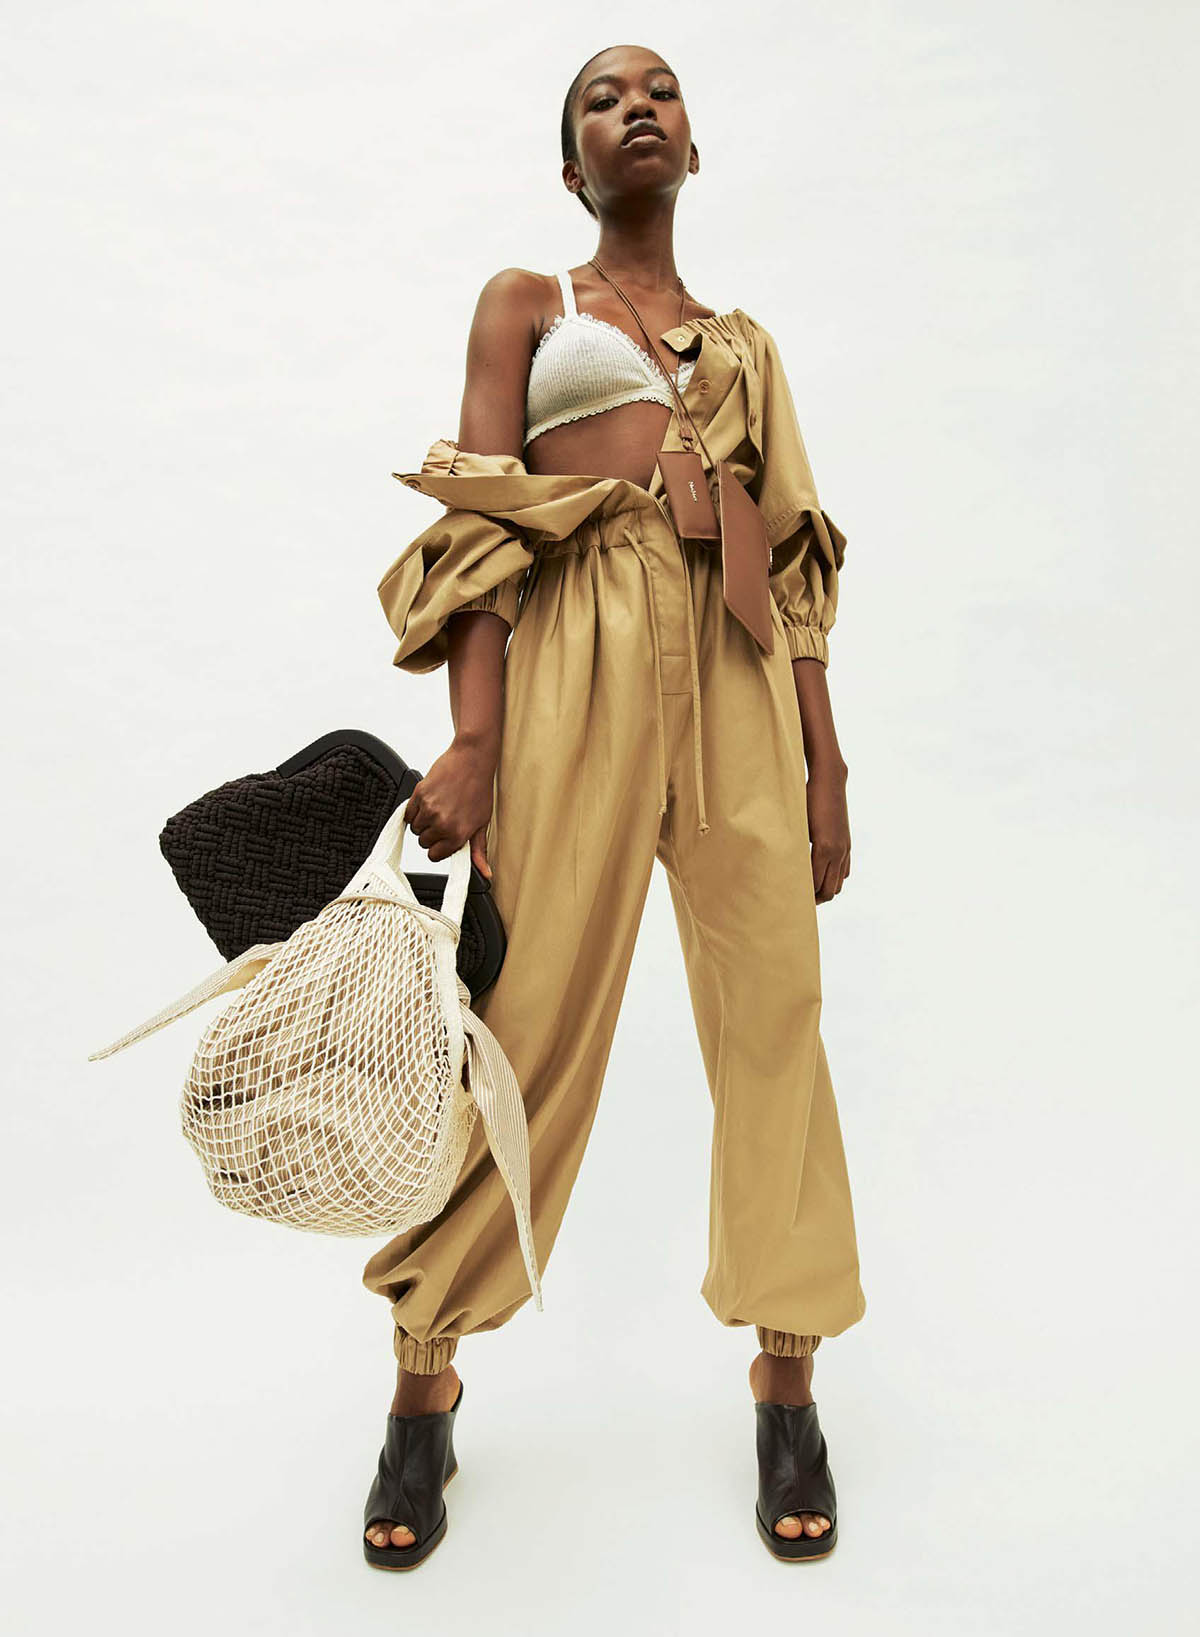 Chizoba Emmanuel by Joachim Mueller-Ruchholtz for The Sunday Times Style March 14th, 2021